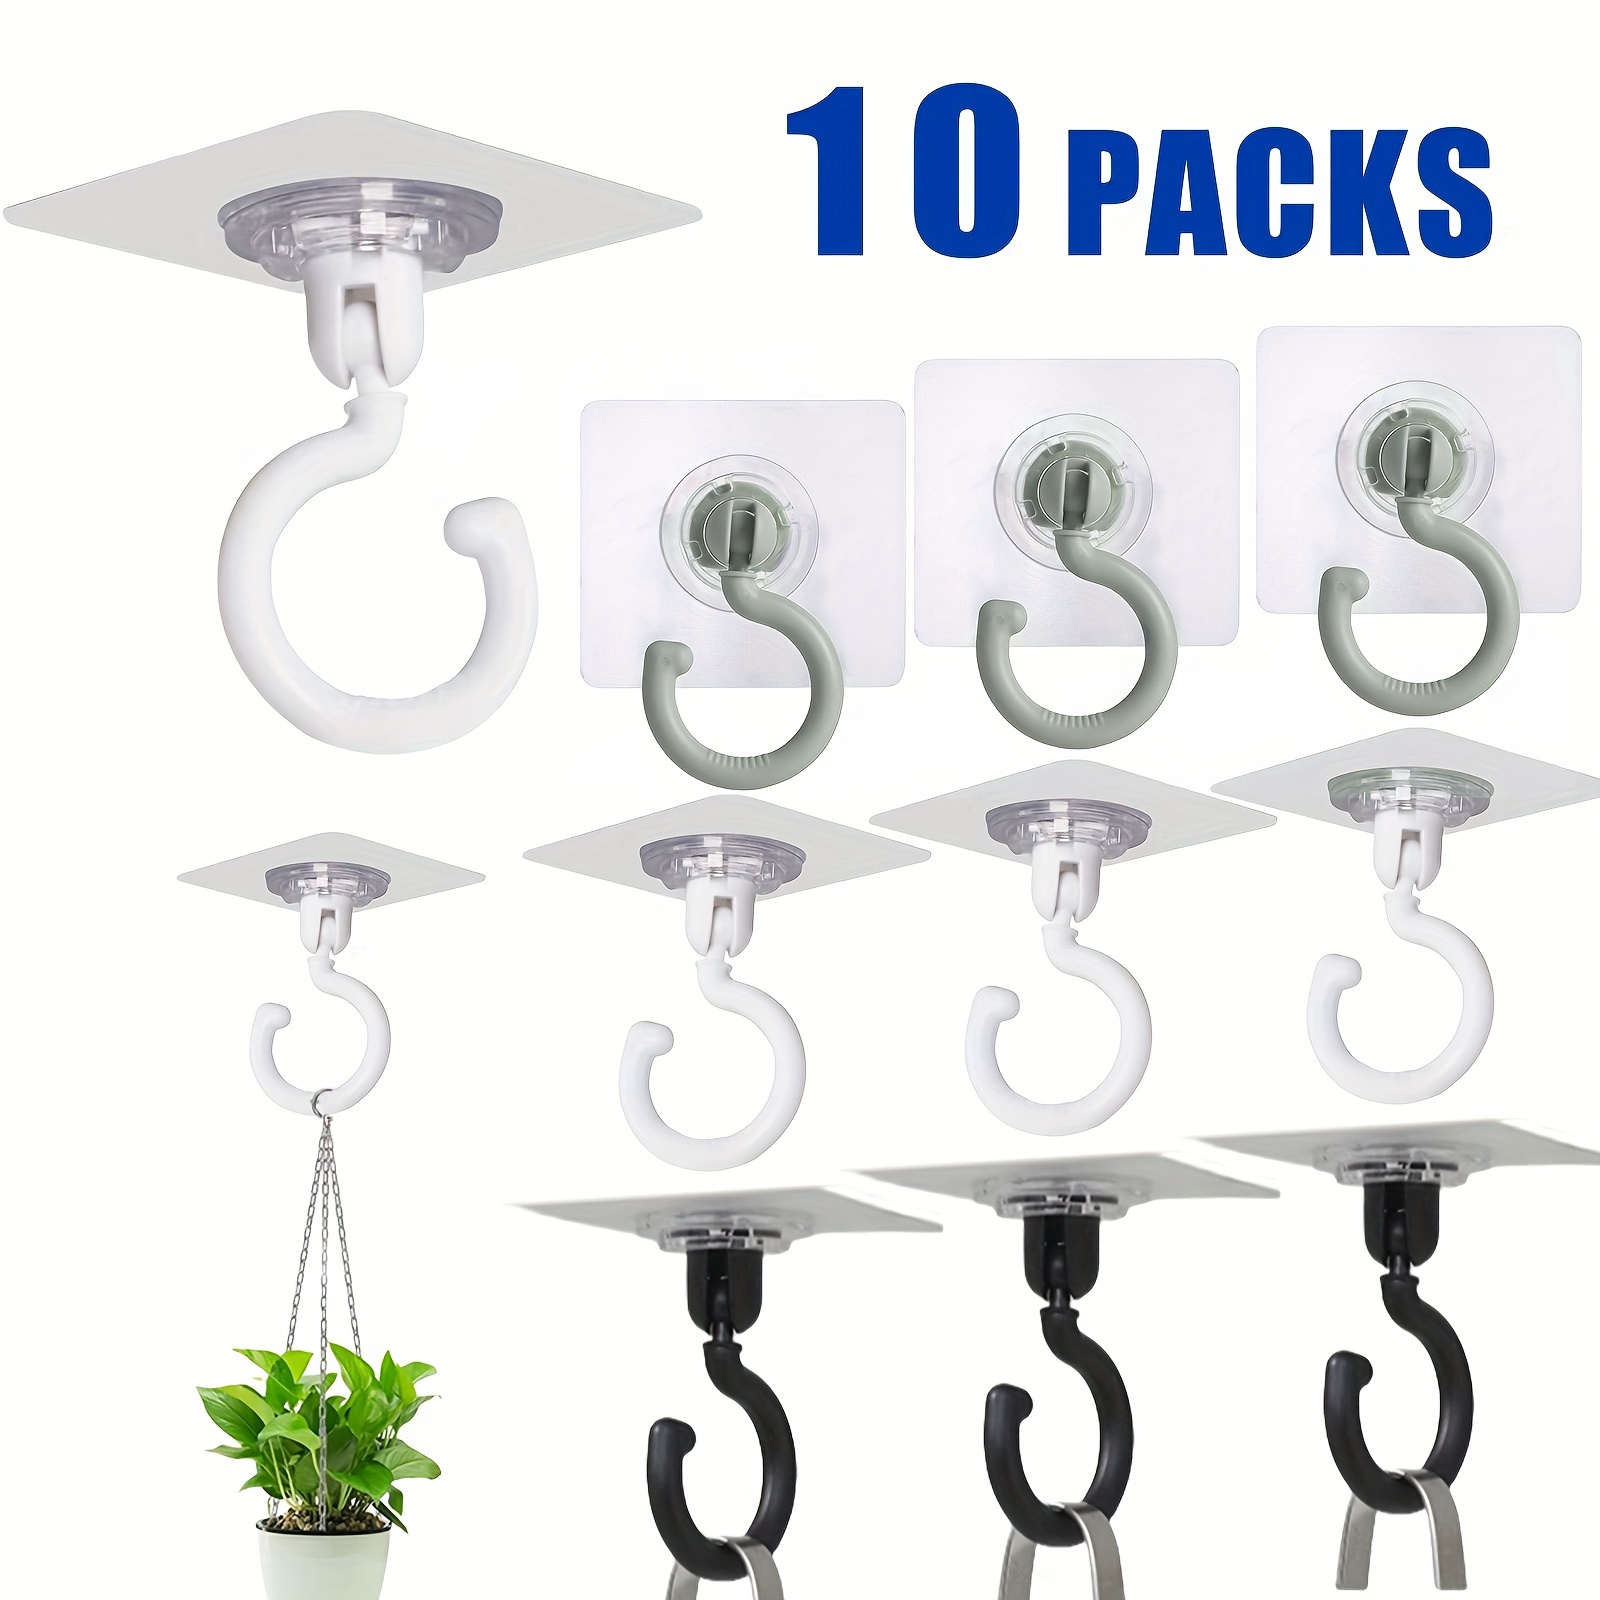  No Hole Adhesive Ceiling Hooks for Hanging Light